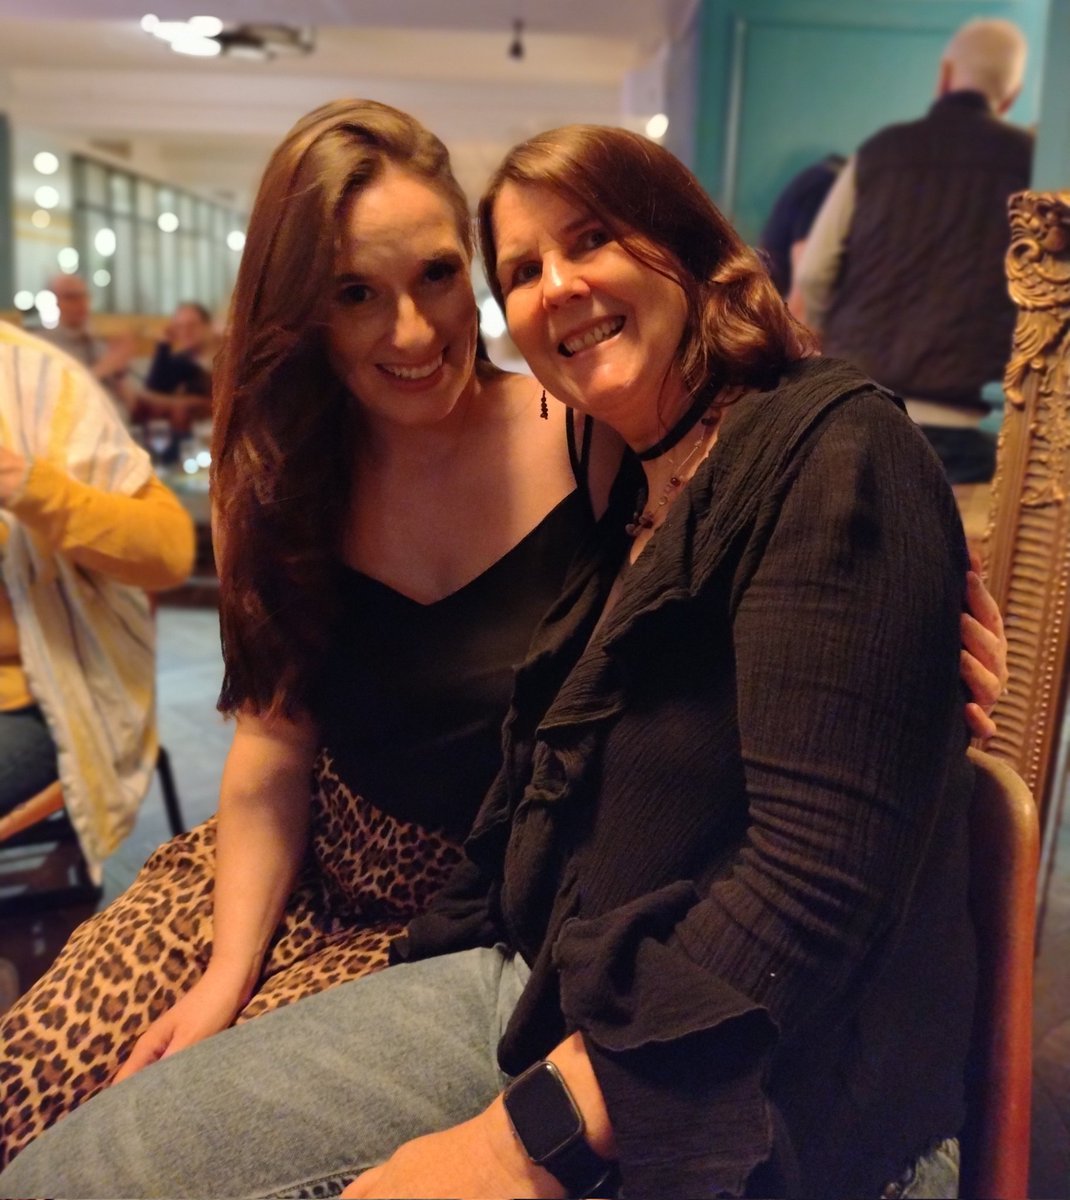 Lovely to catch up with @HannahDeuce my 'old' publicist from @emblabooks last night @CrimeFest. Hannah helped launch the #missclaravale mysteries & is now working her magic @BoldwoodBooks . @CaraChimirri - wish you were here! Thanks to @HeatherJFitt for the snap.